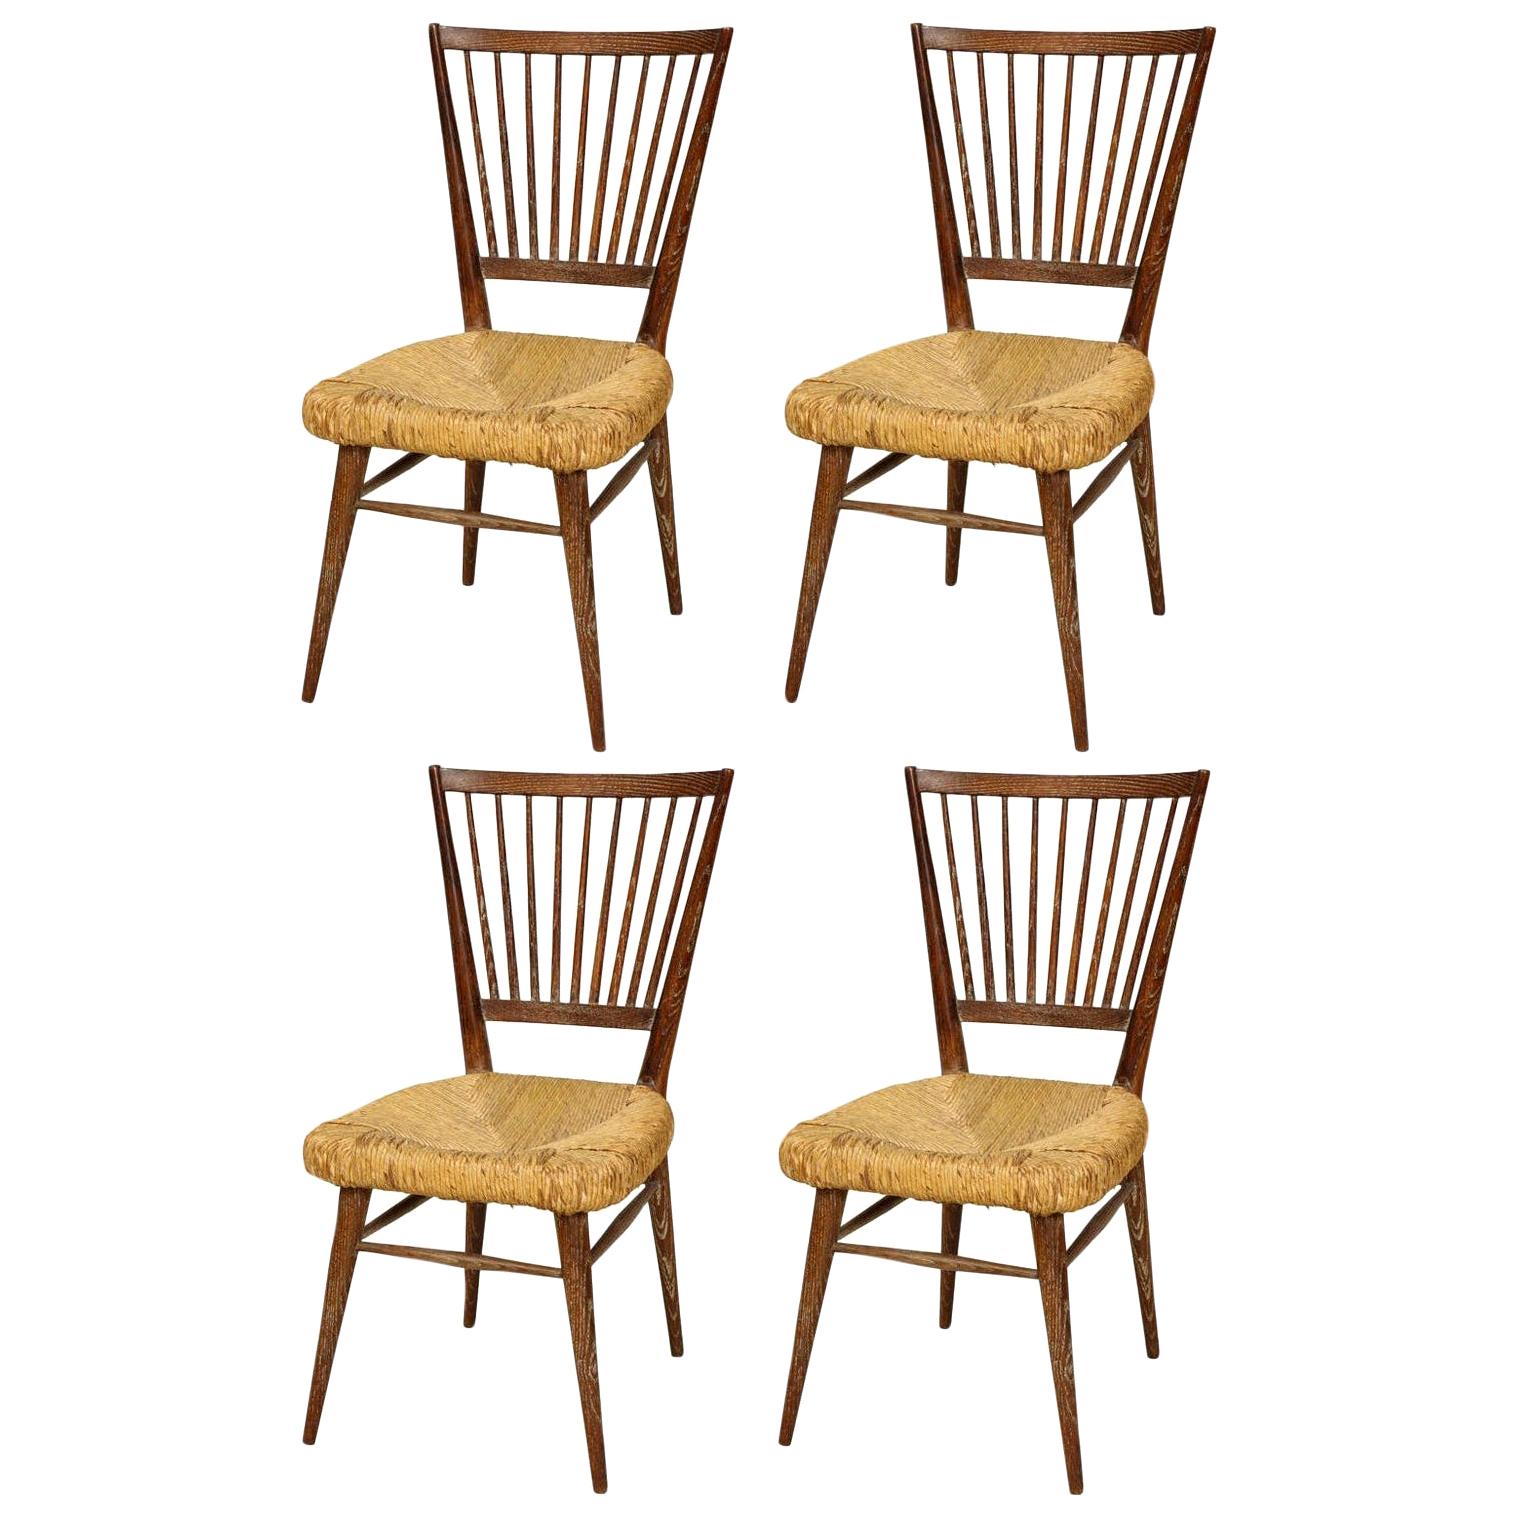 Set of Four Italian Midcentury Cerused Oak Chairs with Rushed Seats